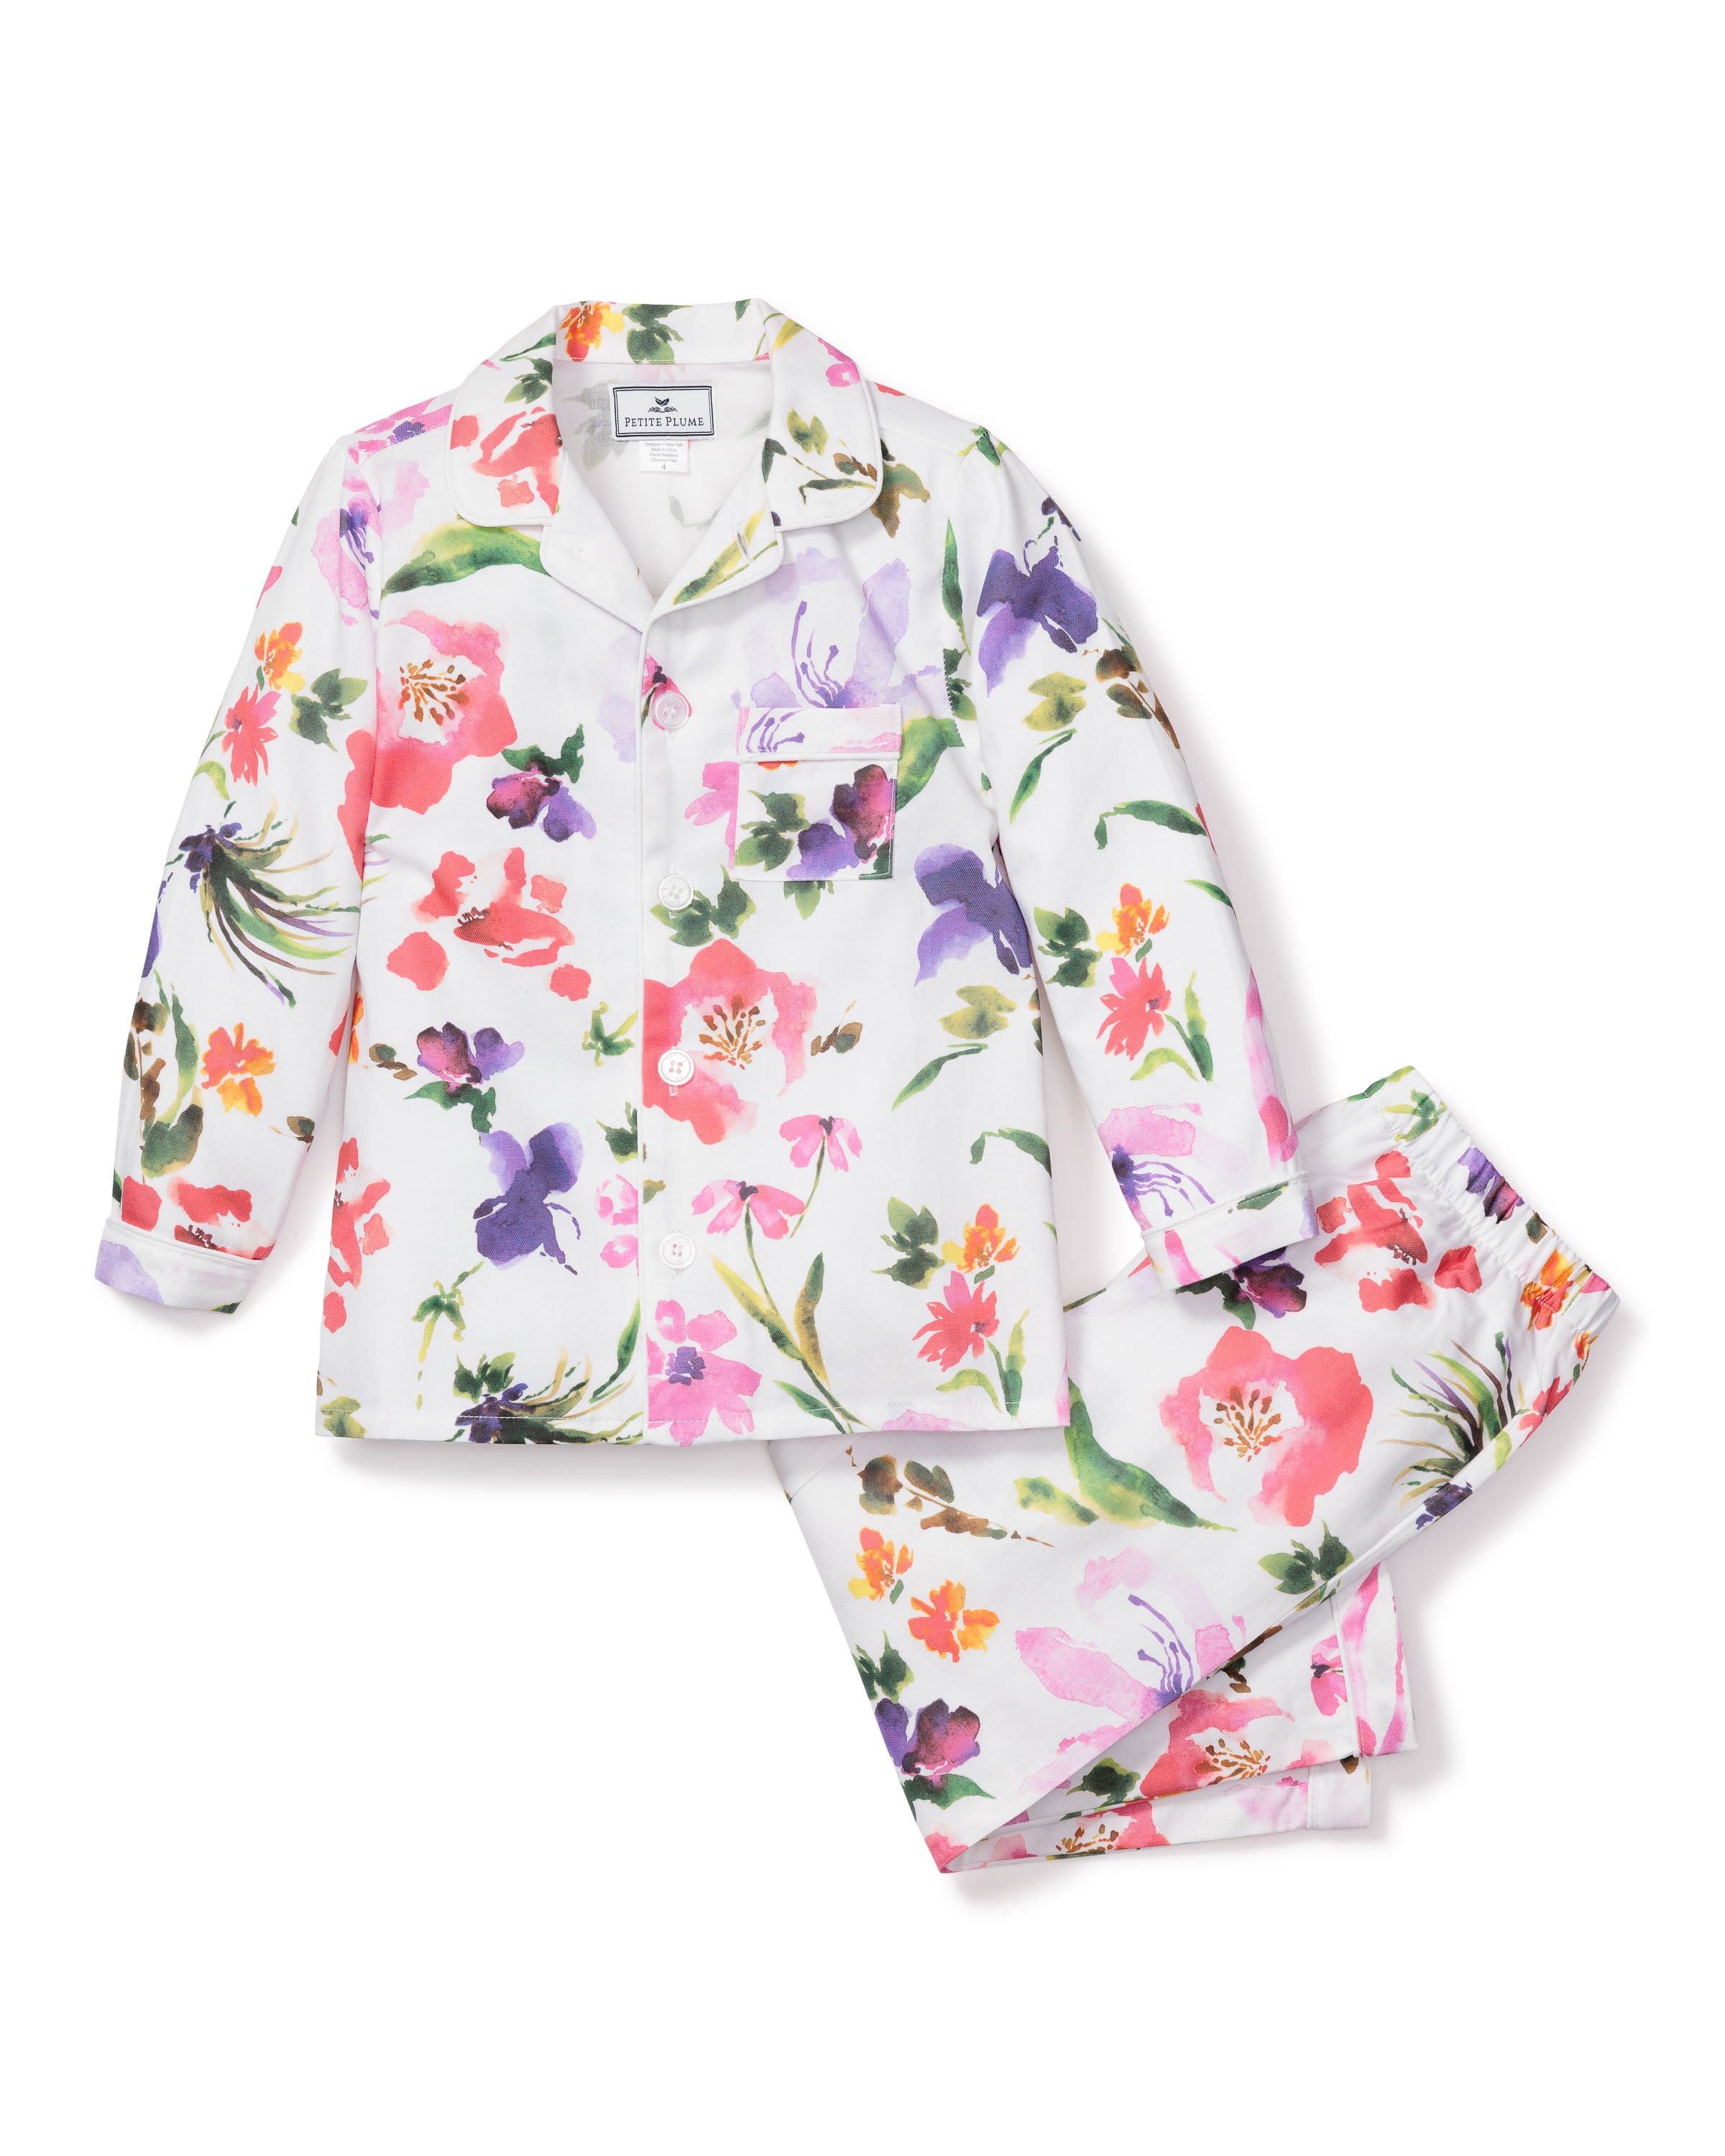 Kid's Twill Pajama Set in Gardens of Giverny